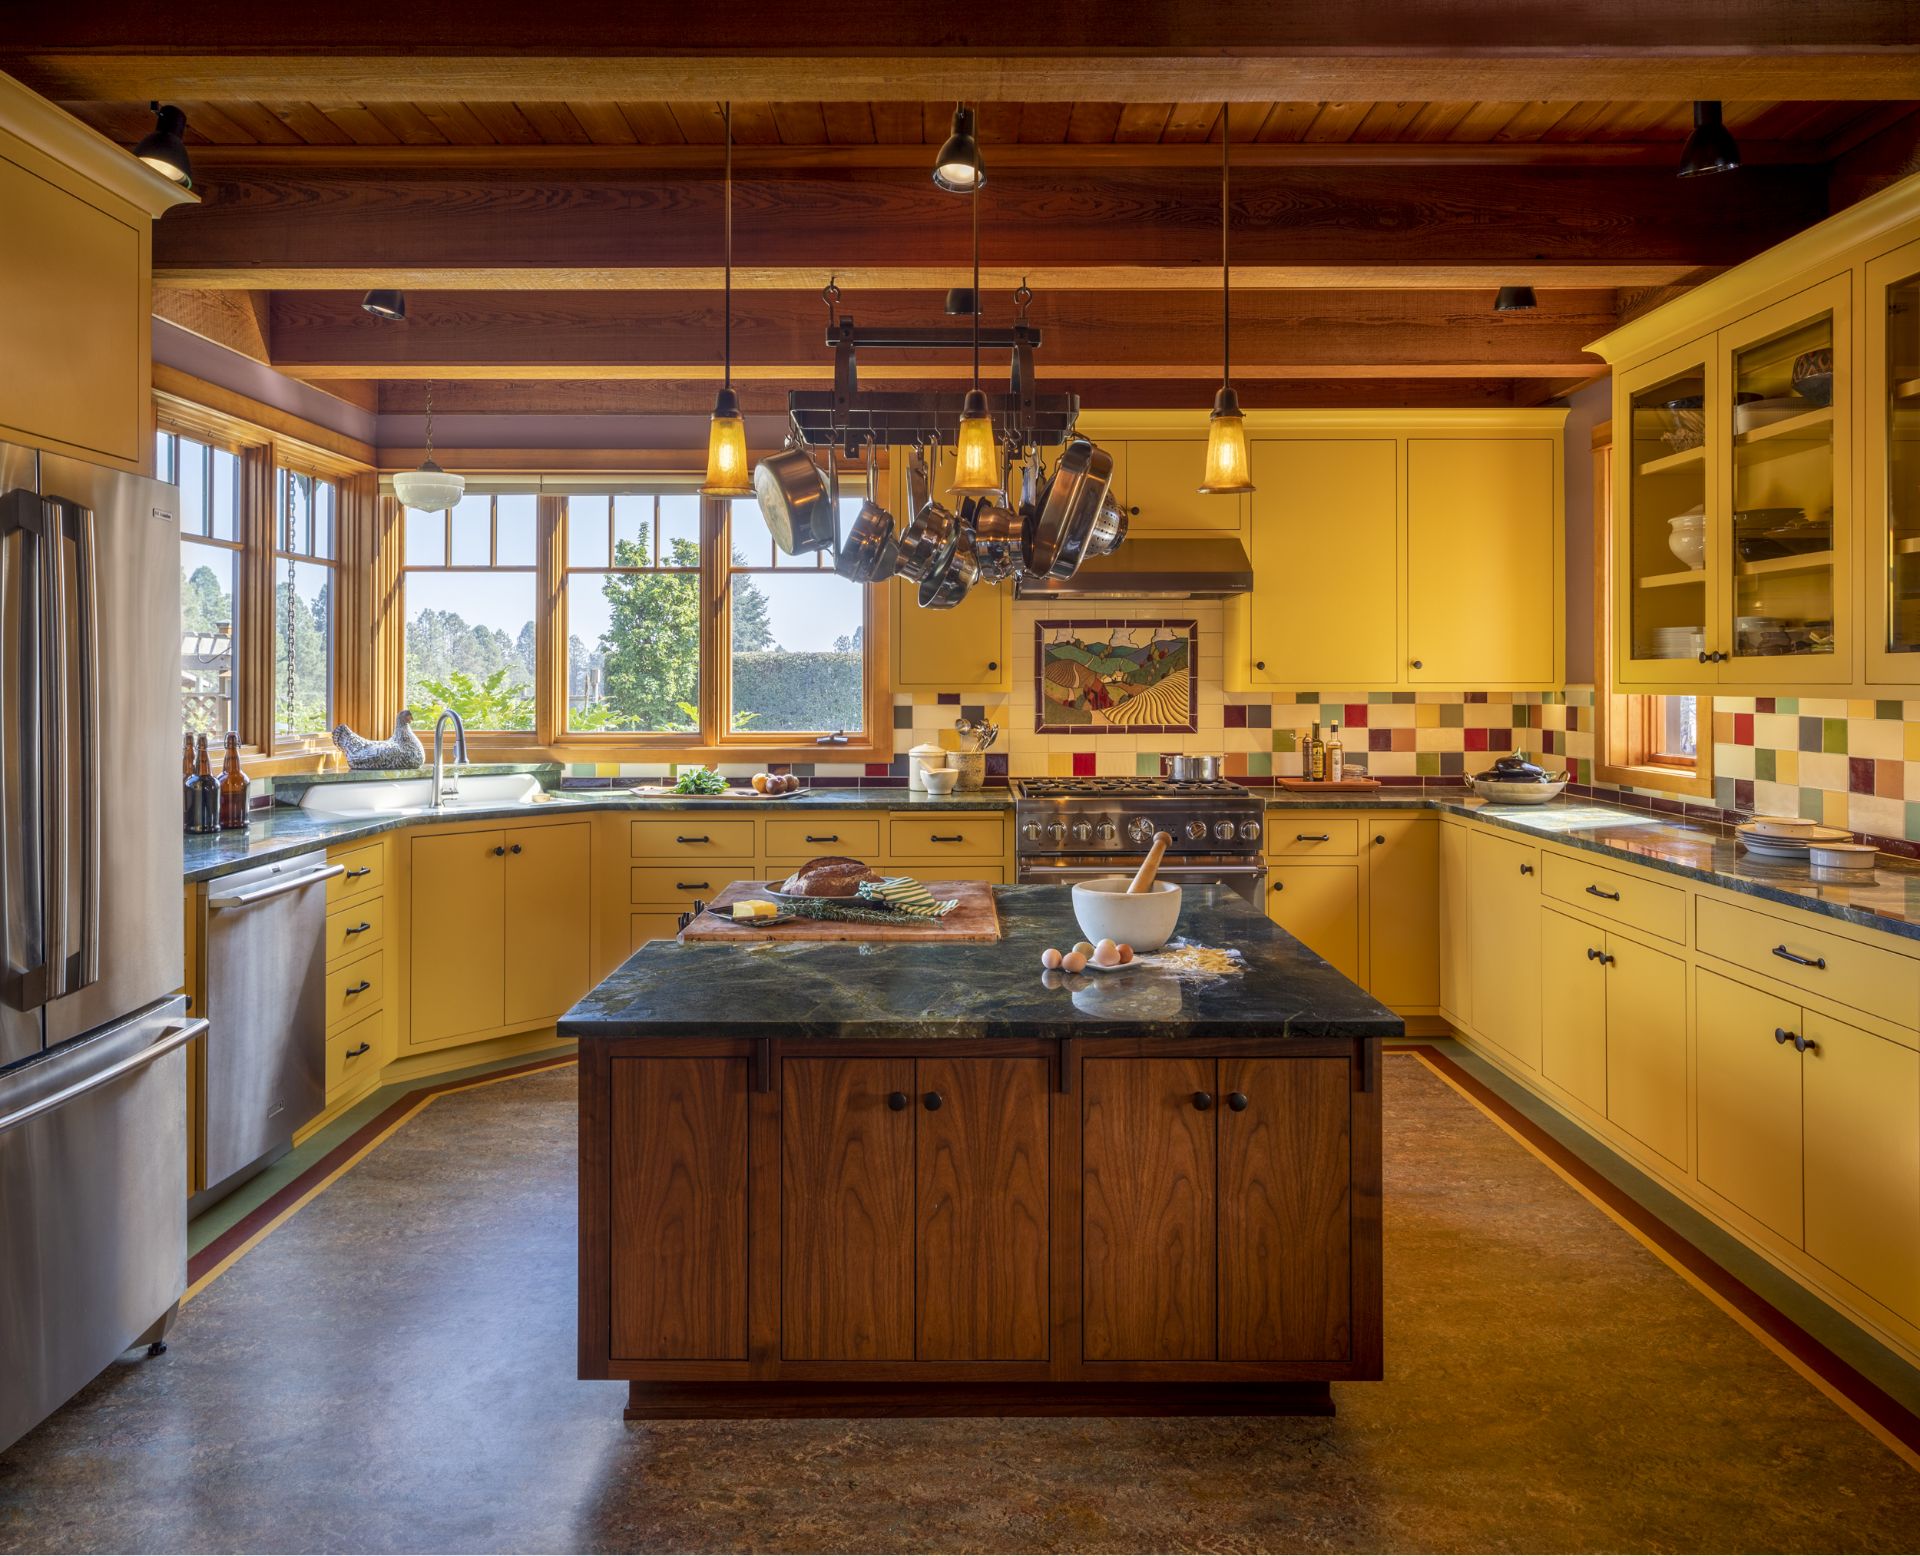 This beautiful farm home in the Willamette Valley received a design and remodel that brings warmth, light, and charm to daily living.